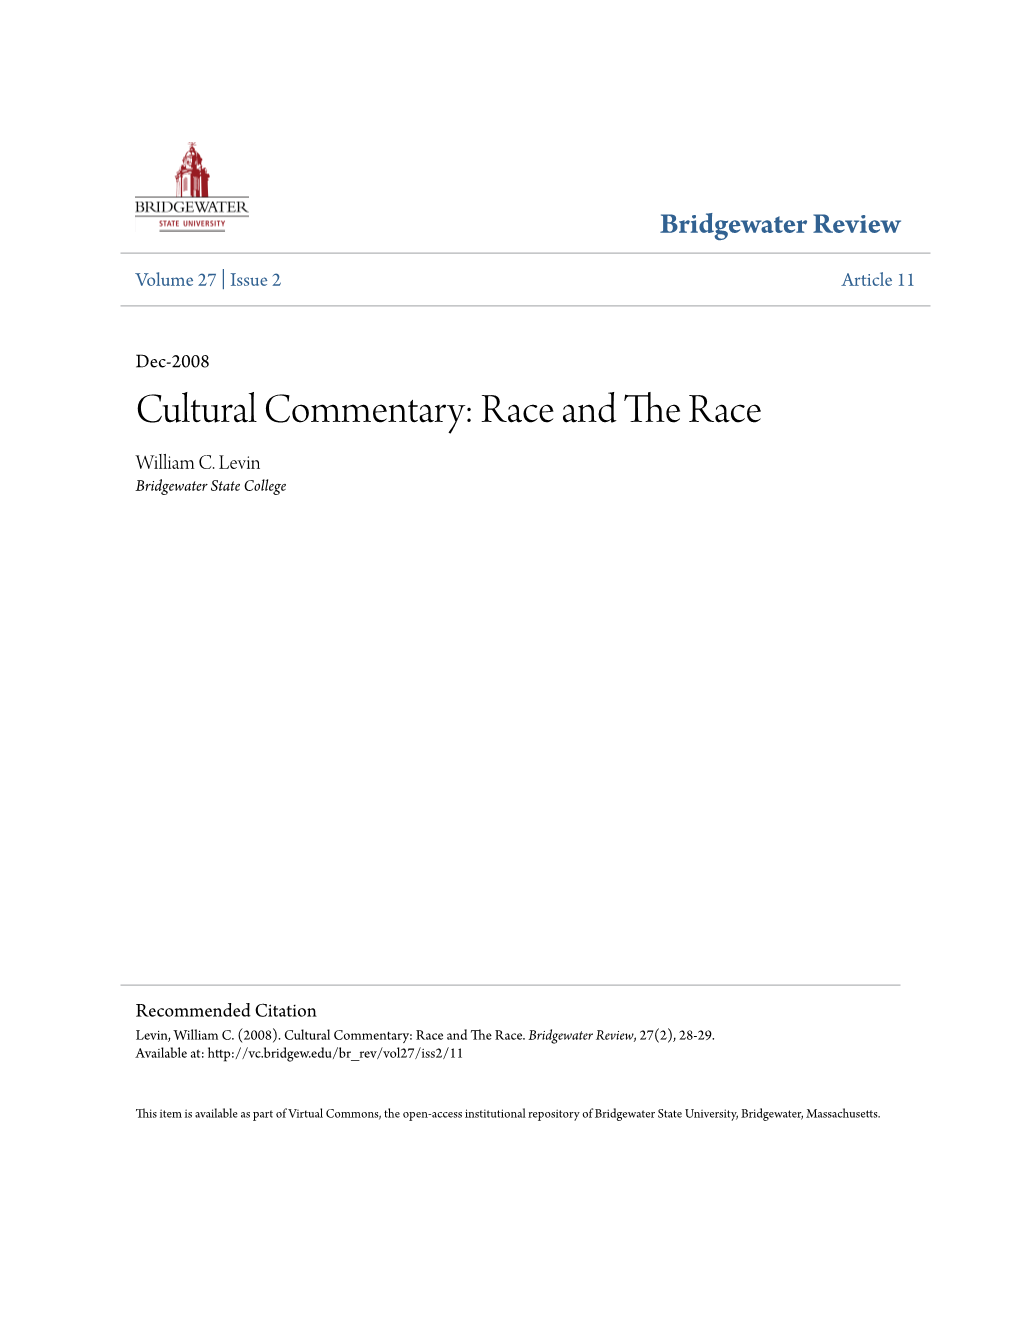 Cultural Commentary: Race and the Race William C